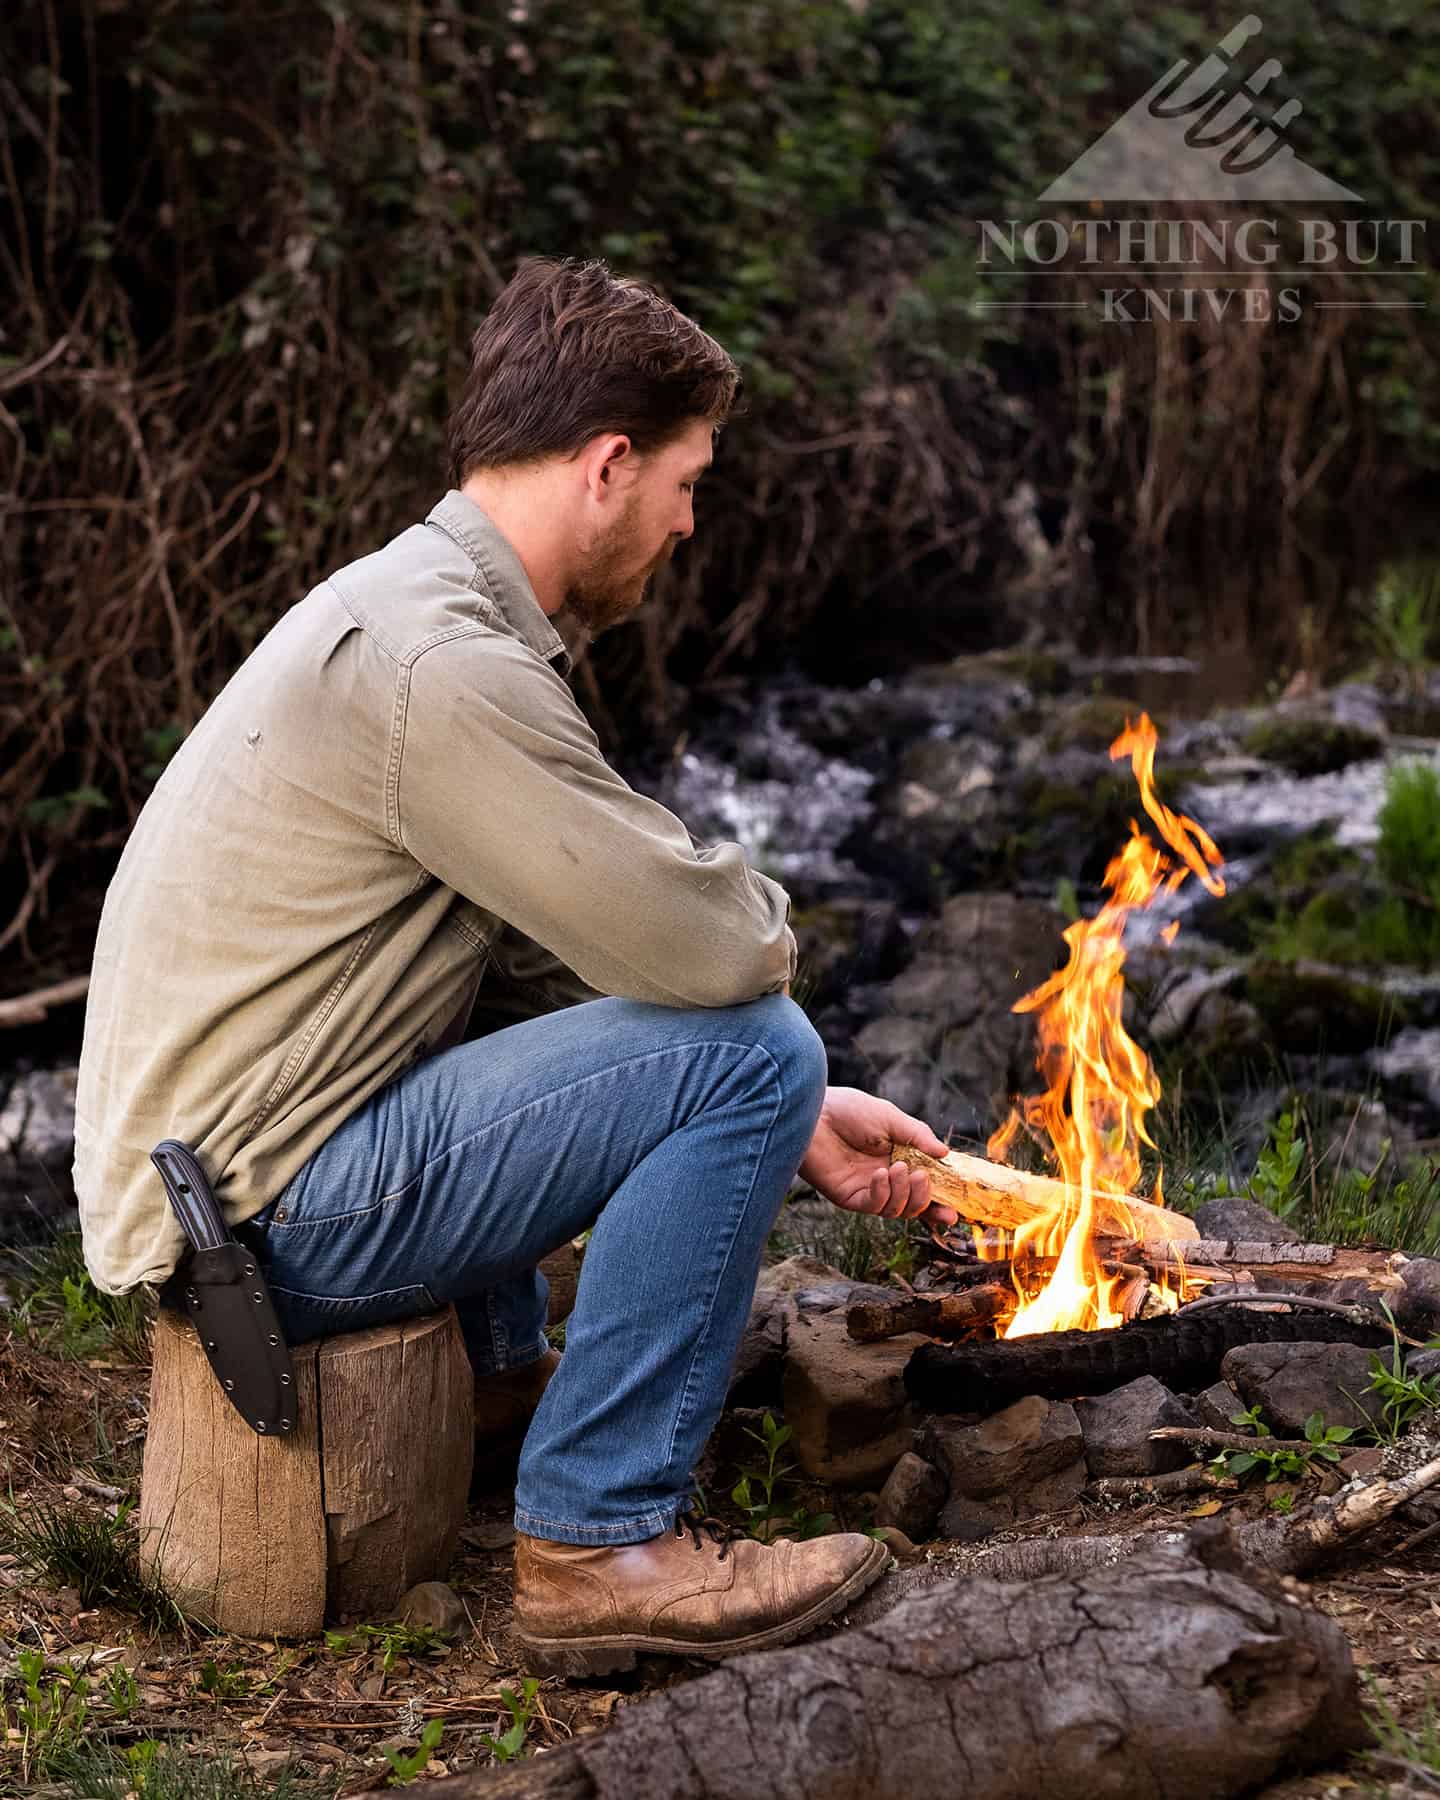 A man sitting by a campfire with the Off-Grid Ridgeback in it's sheath on his belt to show what a great camping knife it is.